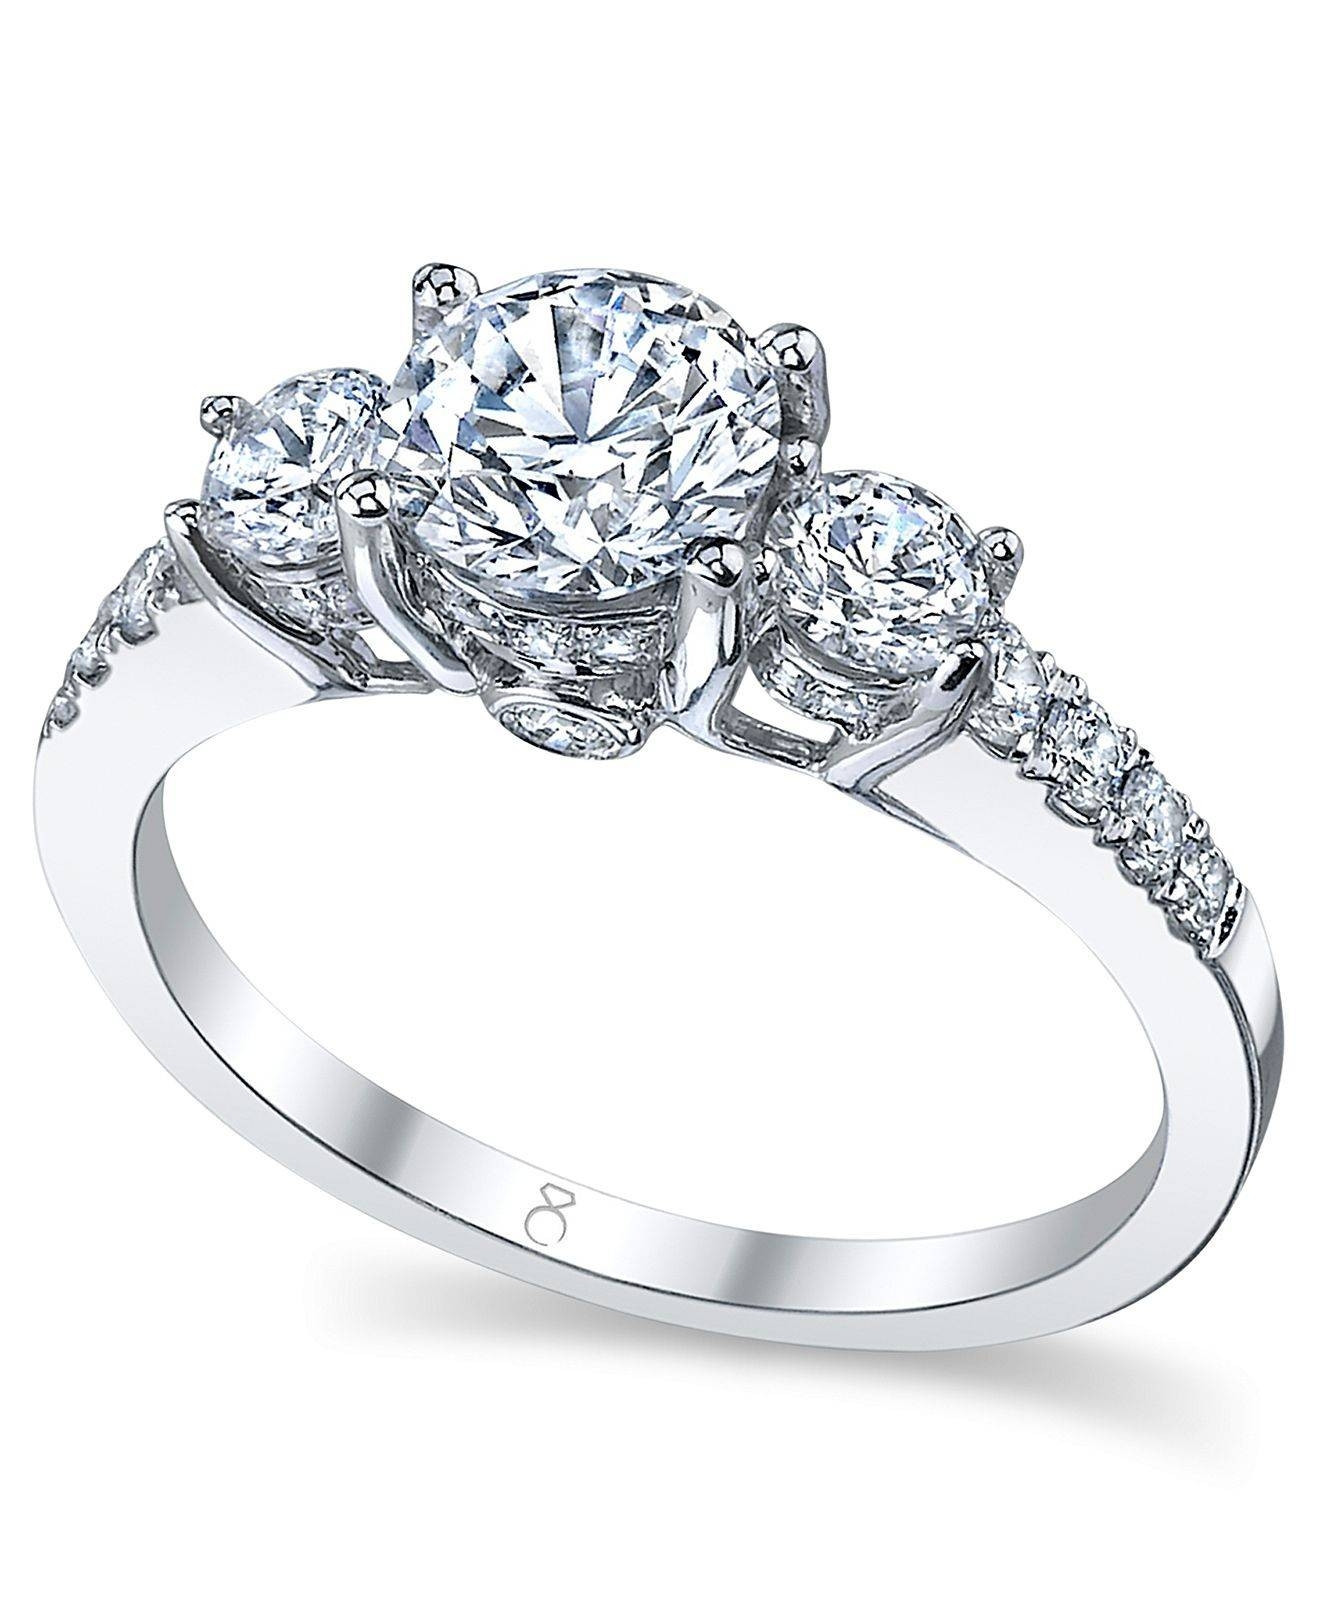 Wedding Rings Under 200
 15 Best Ideas of Engagement Rings For Under 200